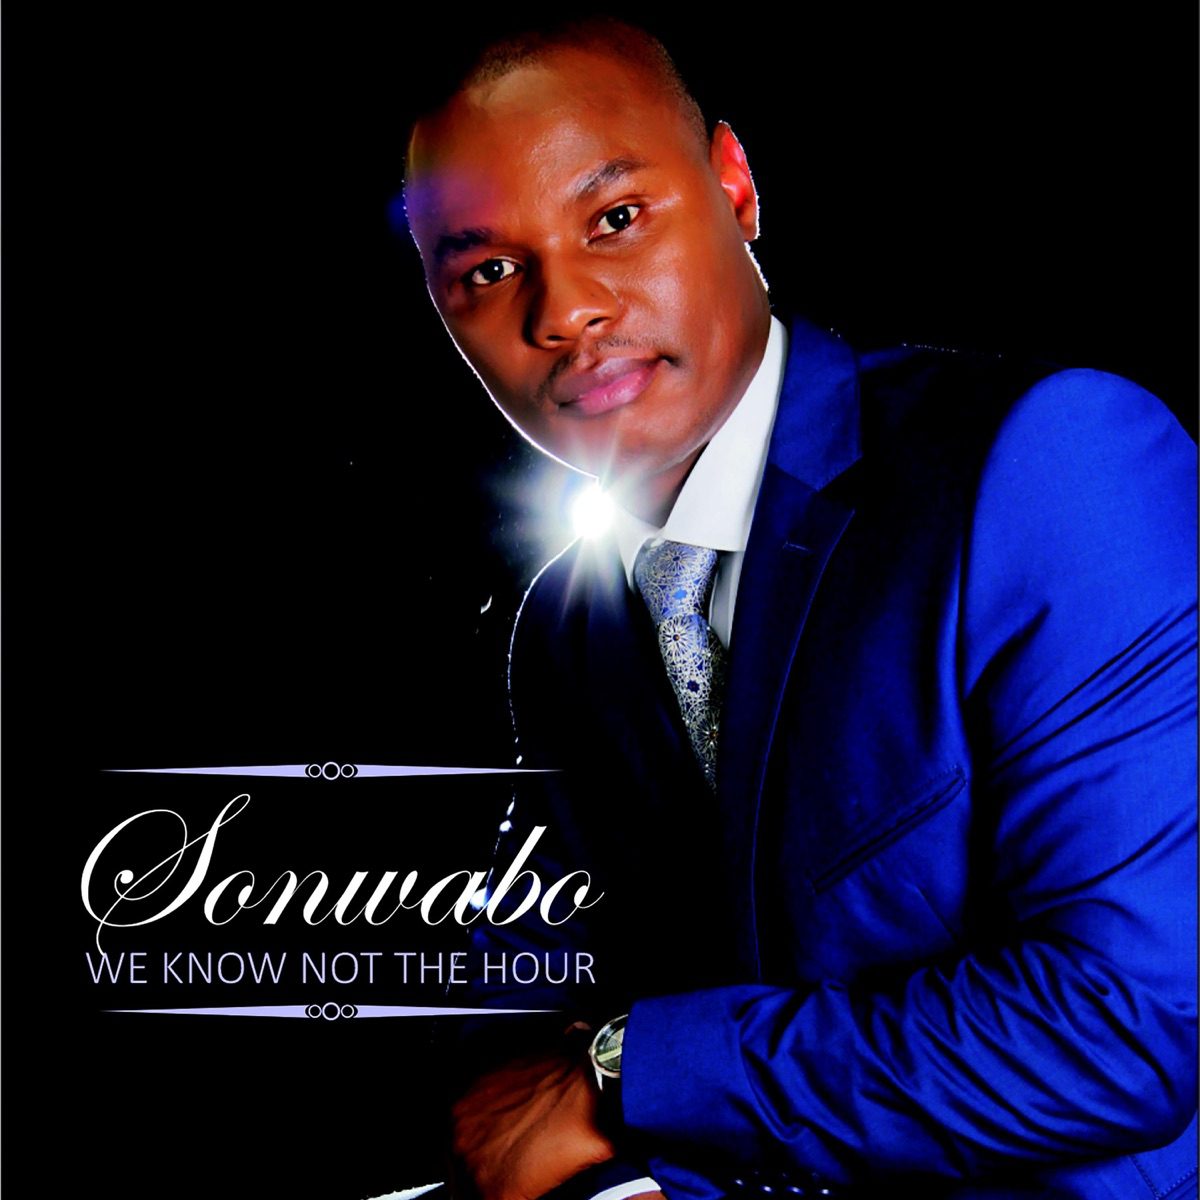 Sonwabo - We Know The Hour CD